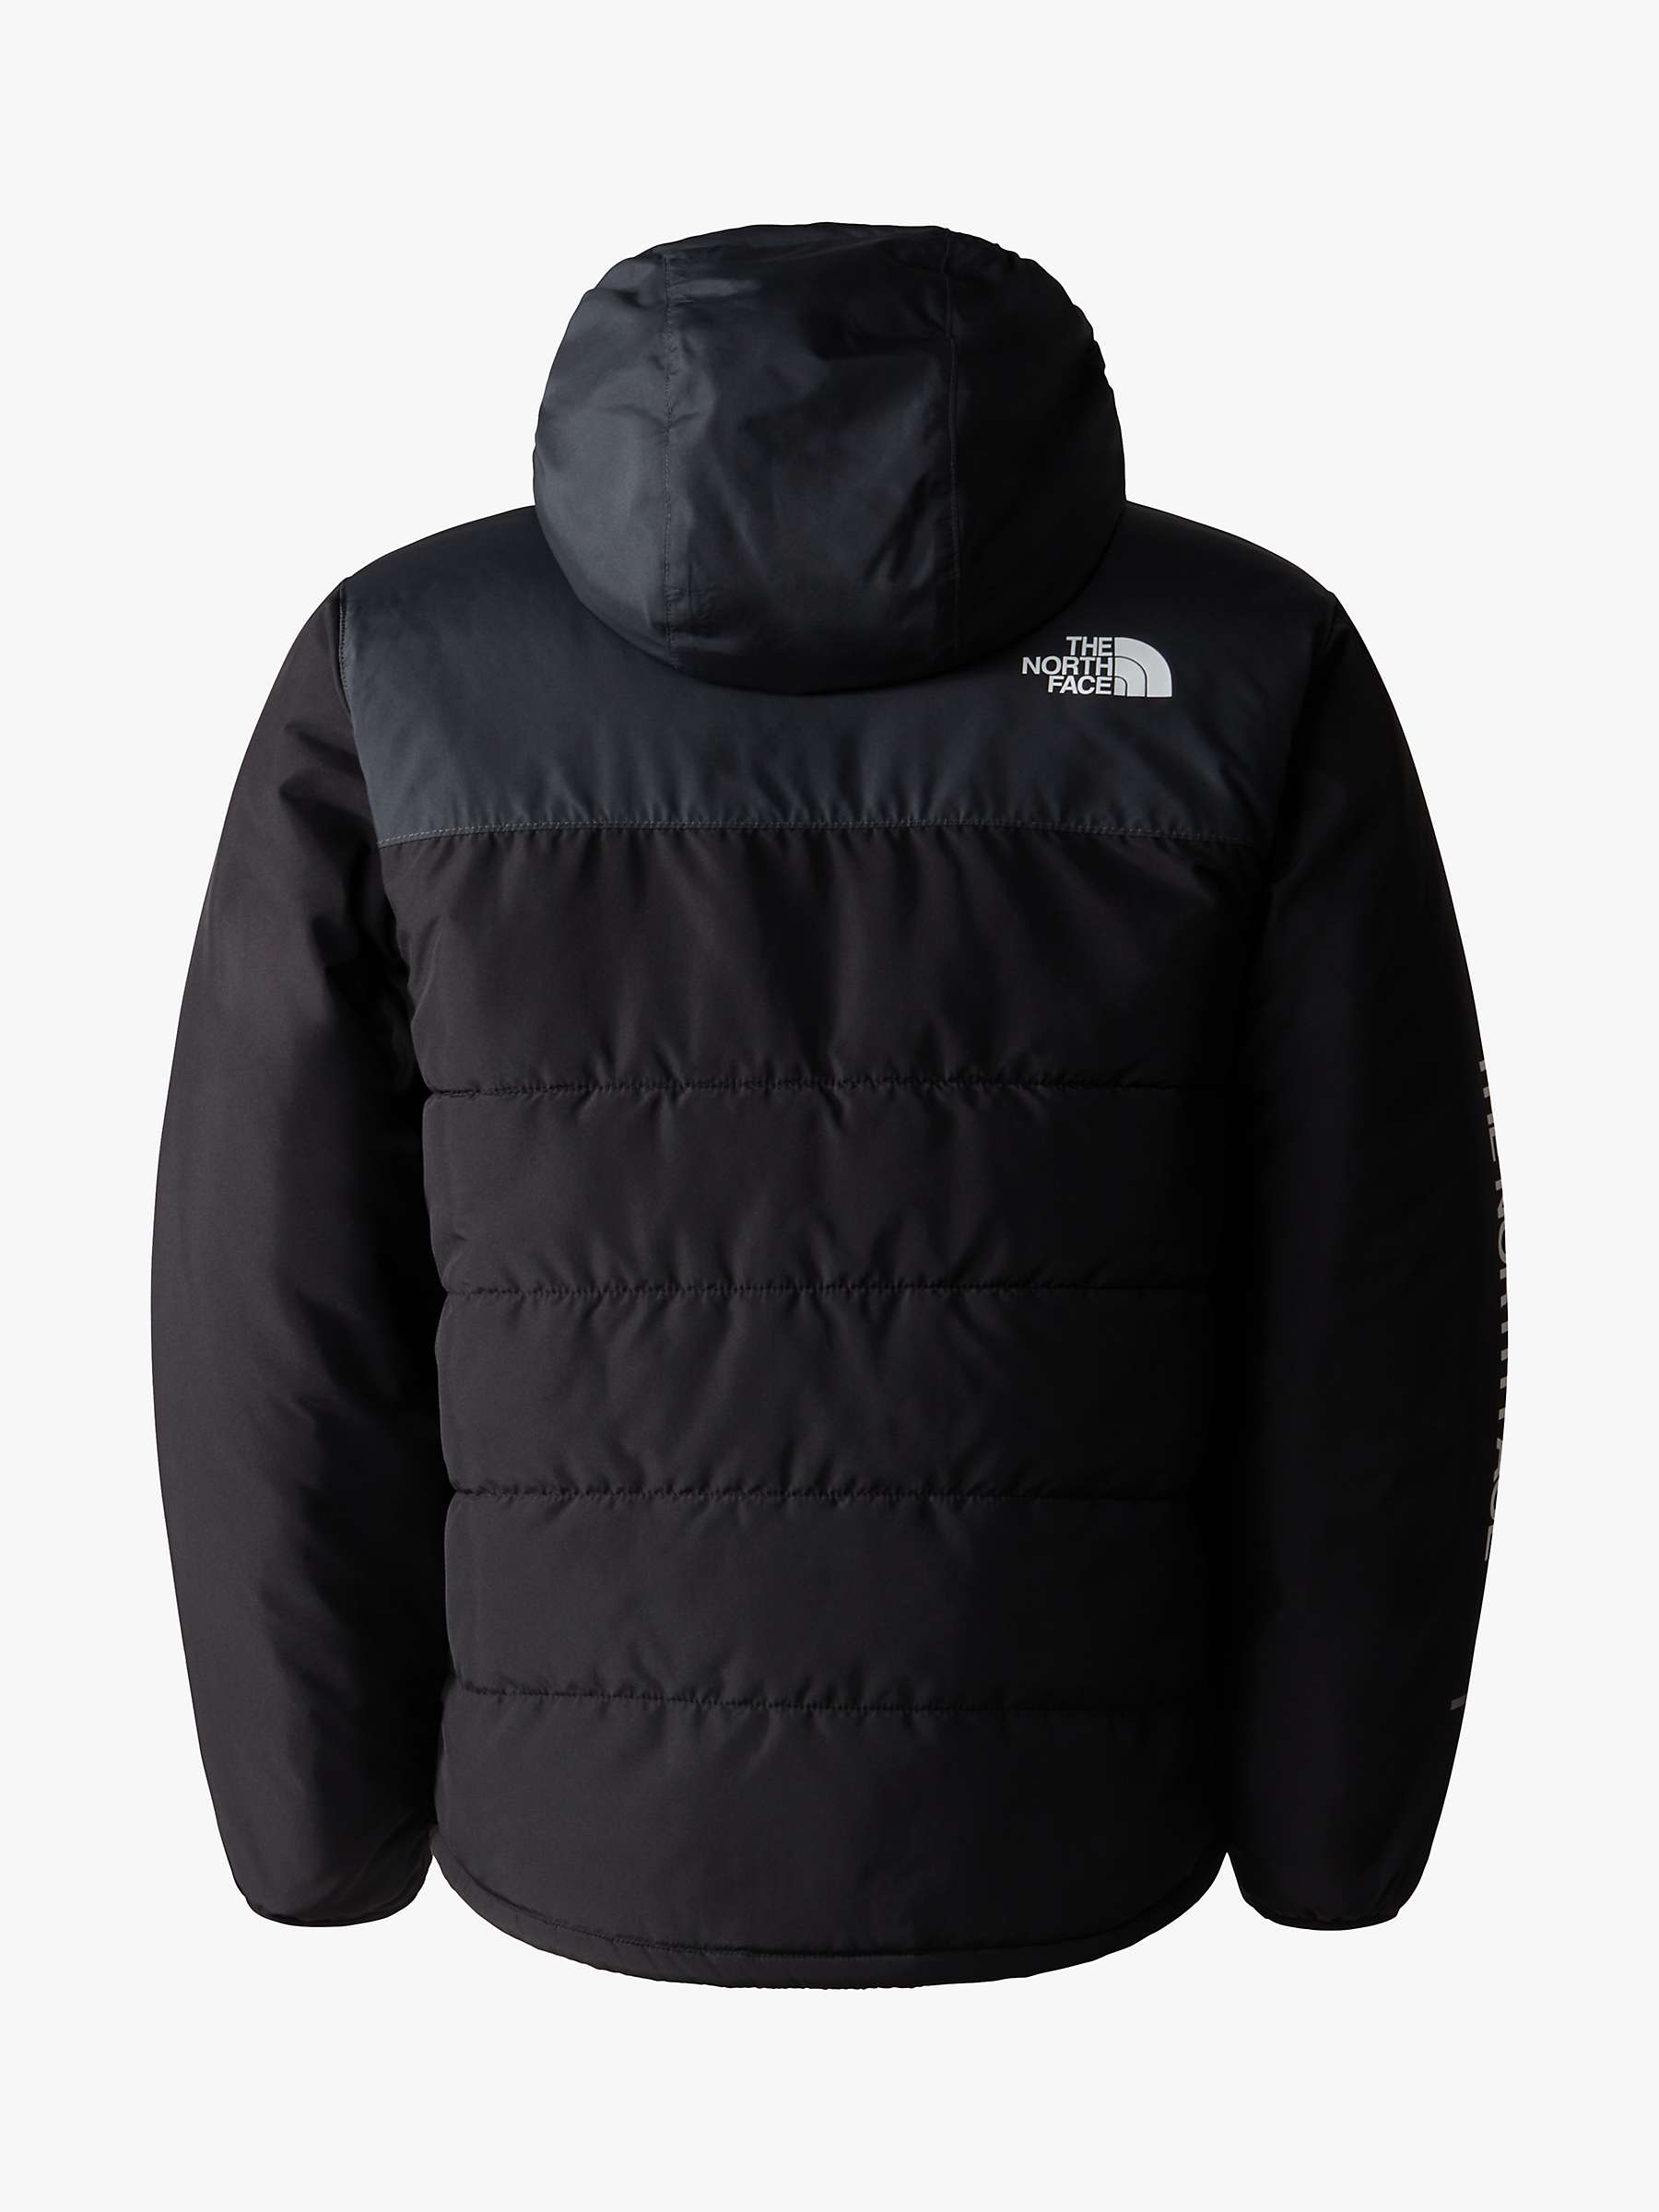 Buy The North Face Kids' Never Stop Insulated Jacket Online at johnlewis.com